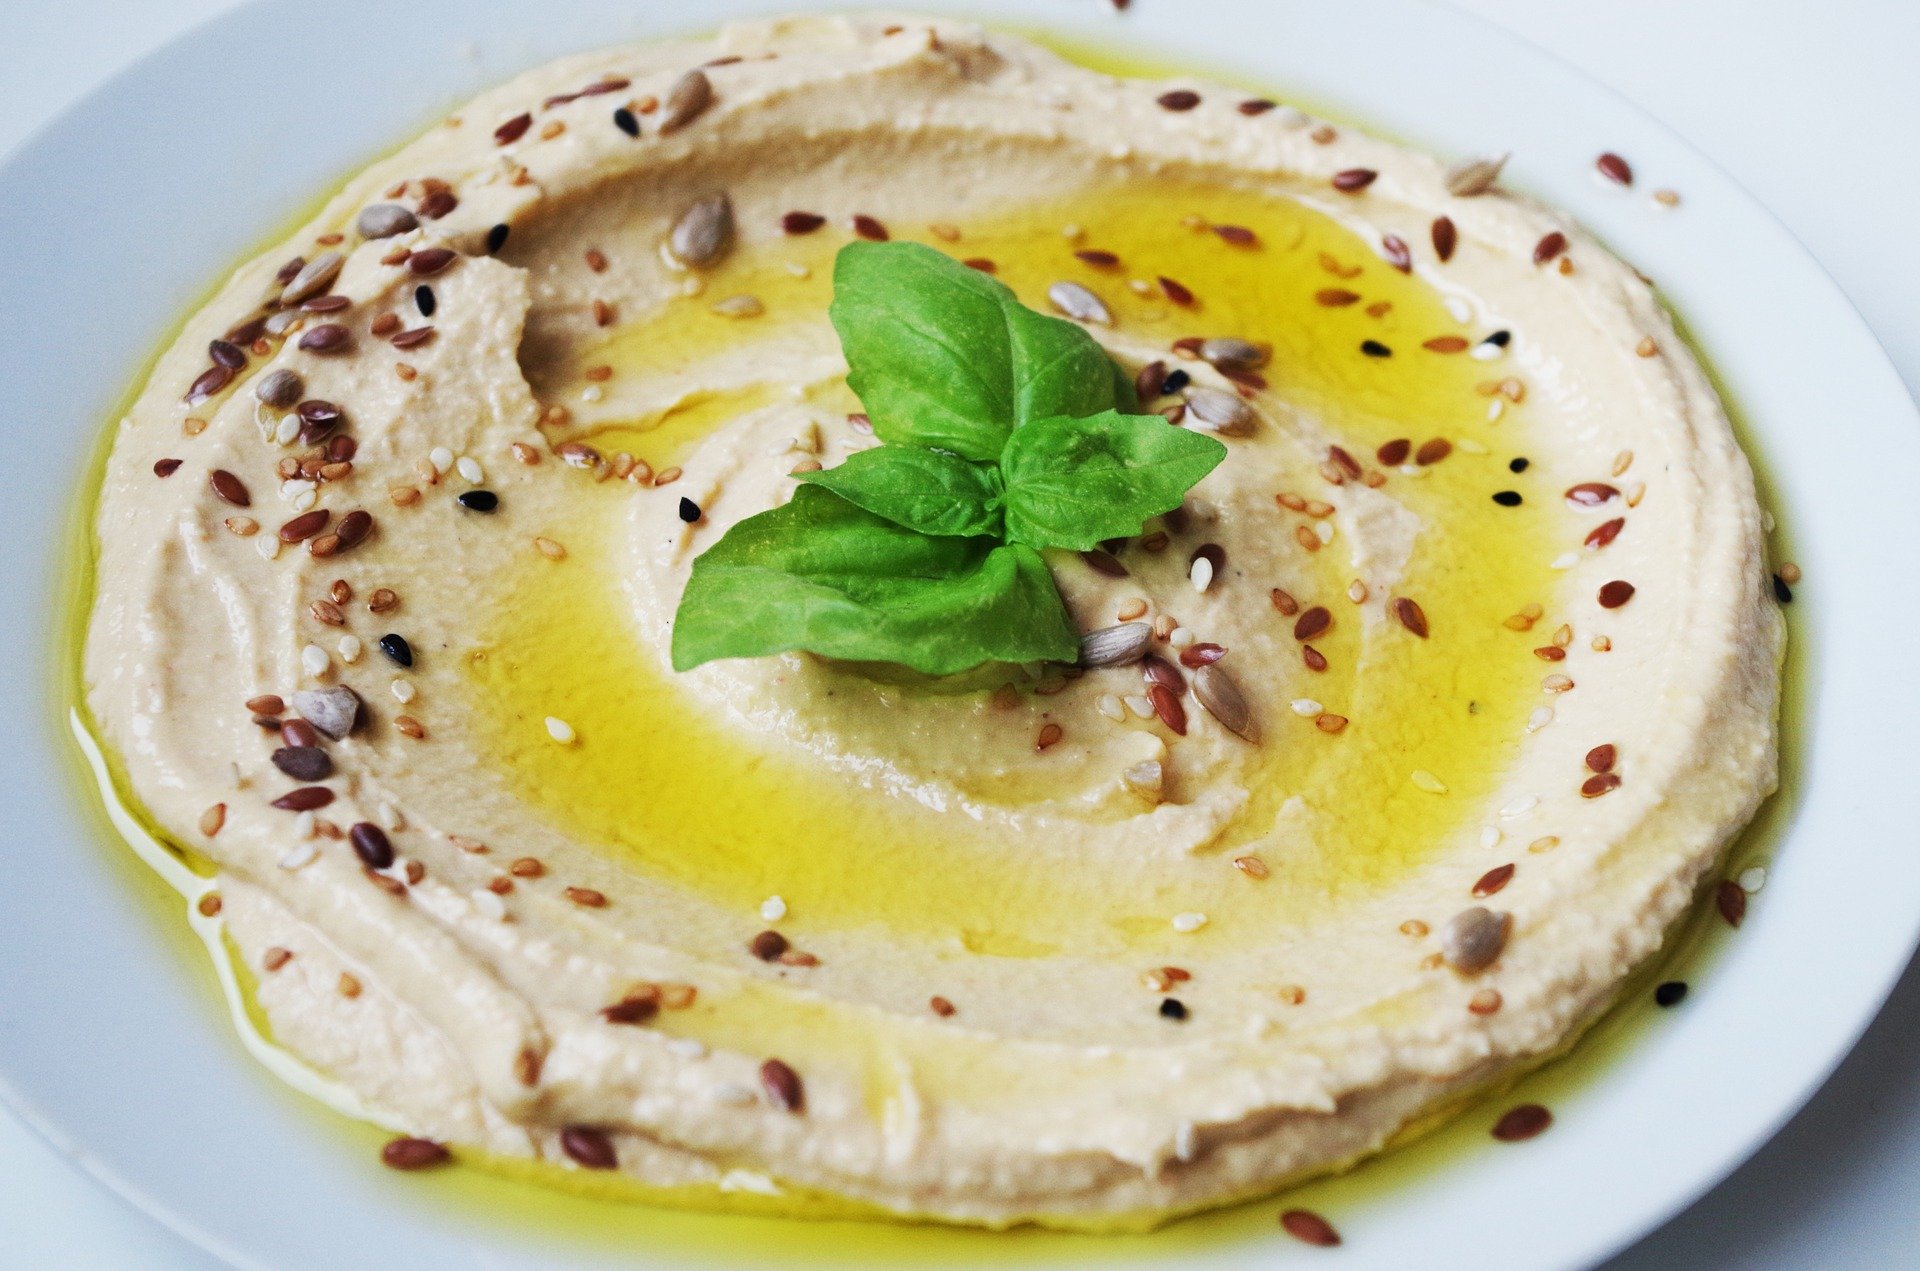 A plate of hummus, traditional Middle Eastern spread